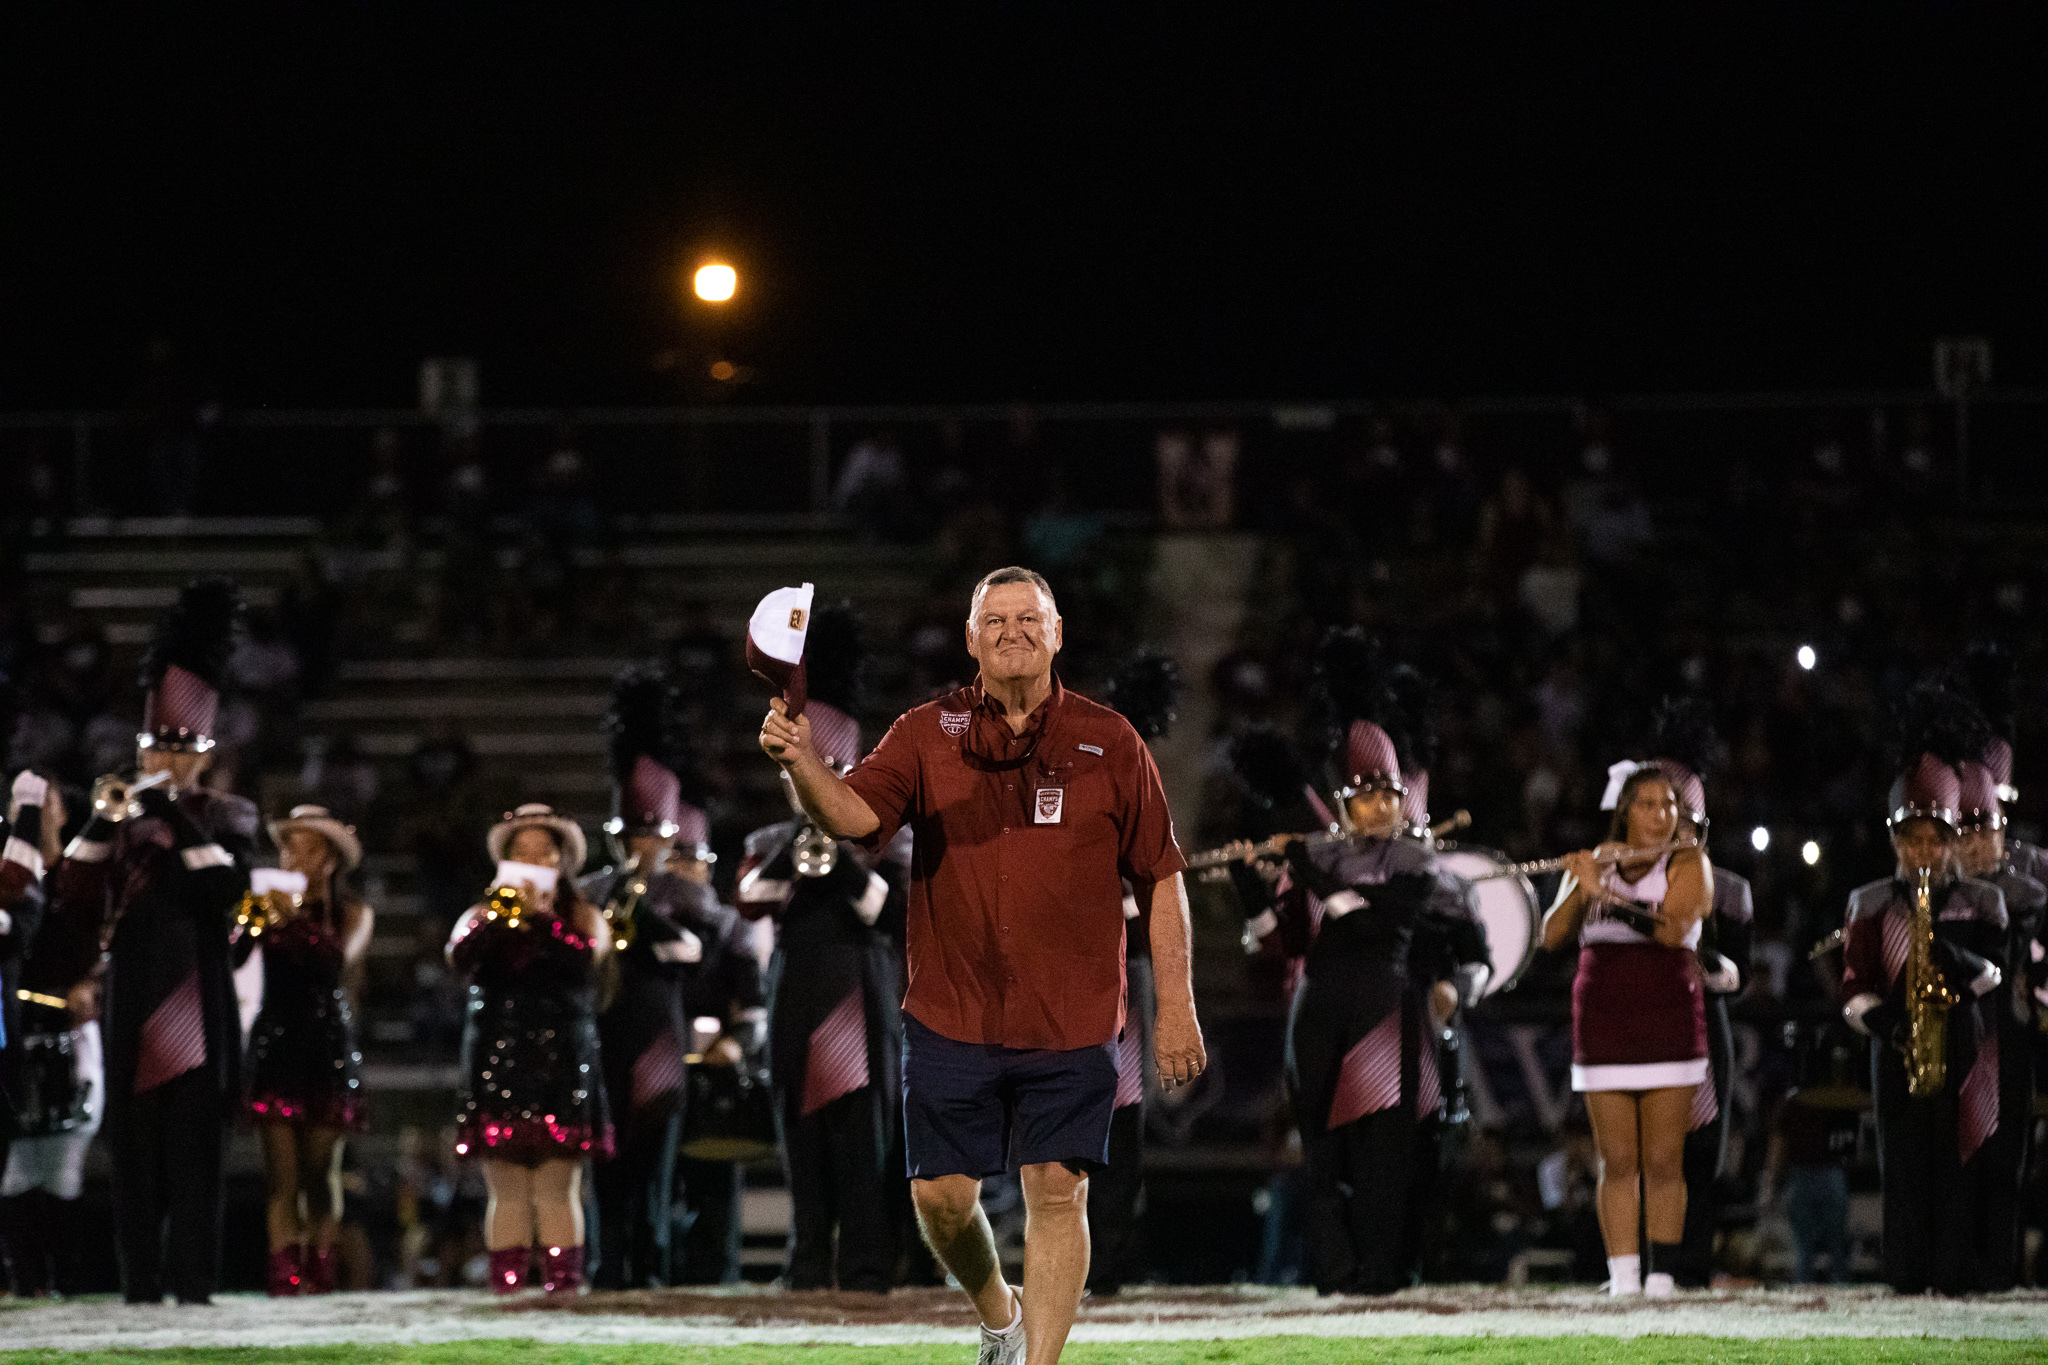 PHOTO: Buck Lanning of the 1972 championship Uvalde football team takes the field on Sept 2, 2022.